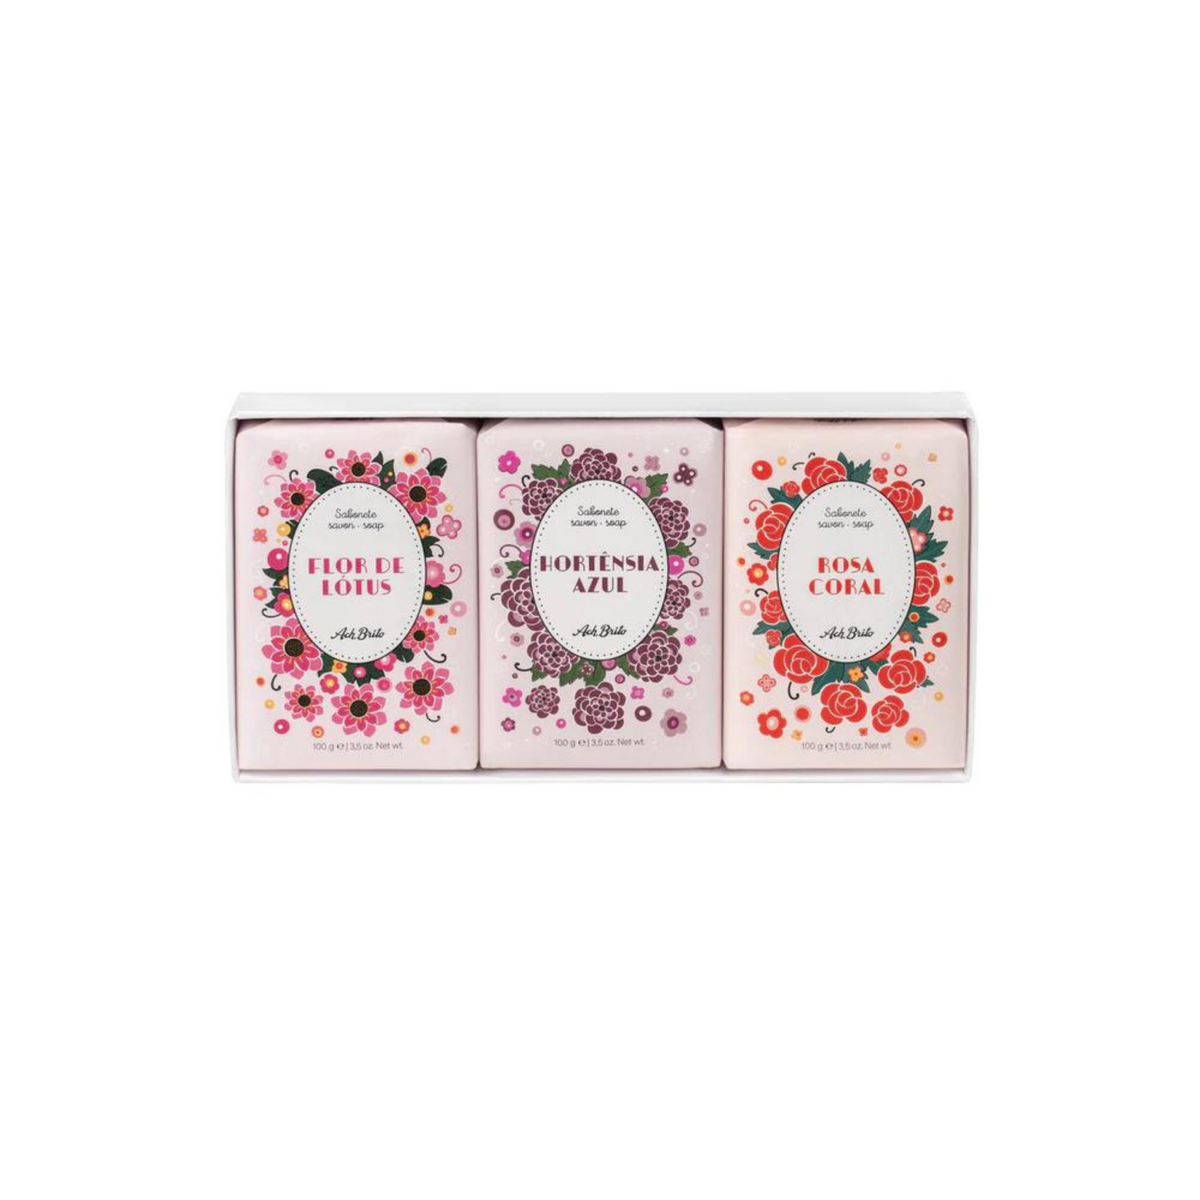 Primary Image of Flowers Soap Box Set